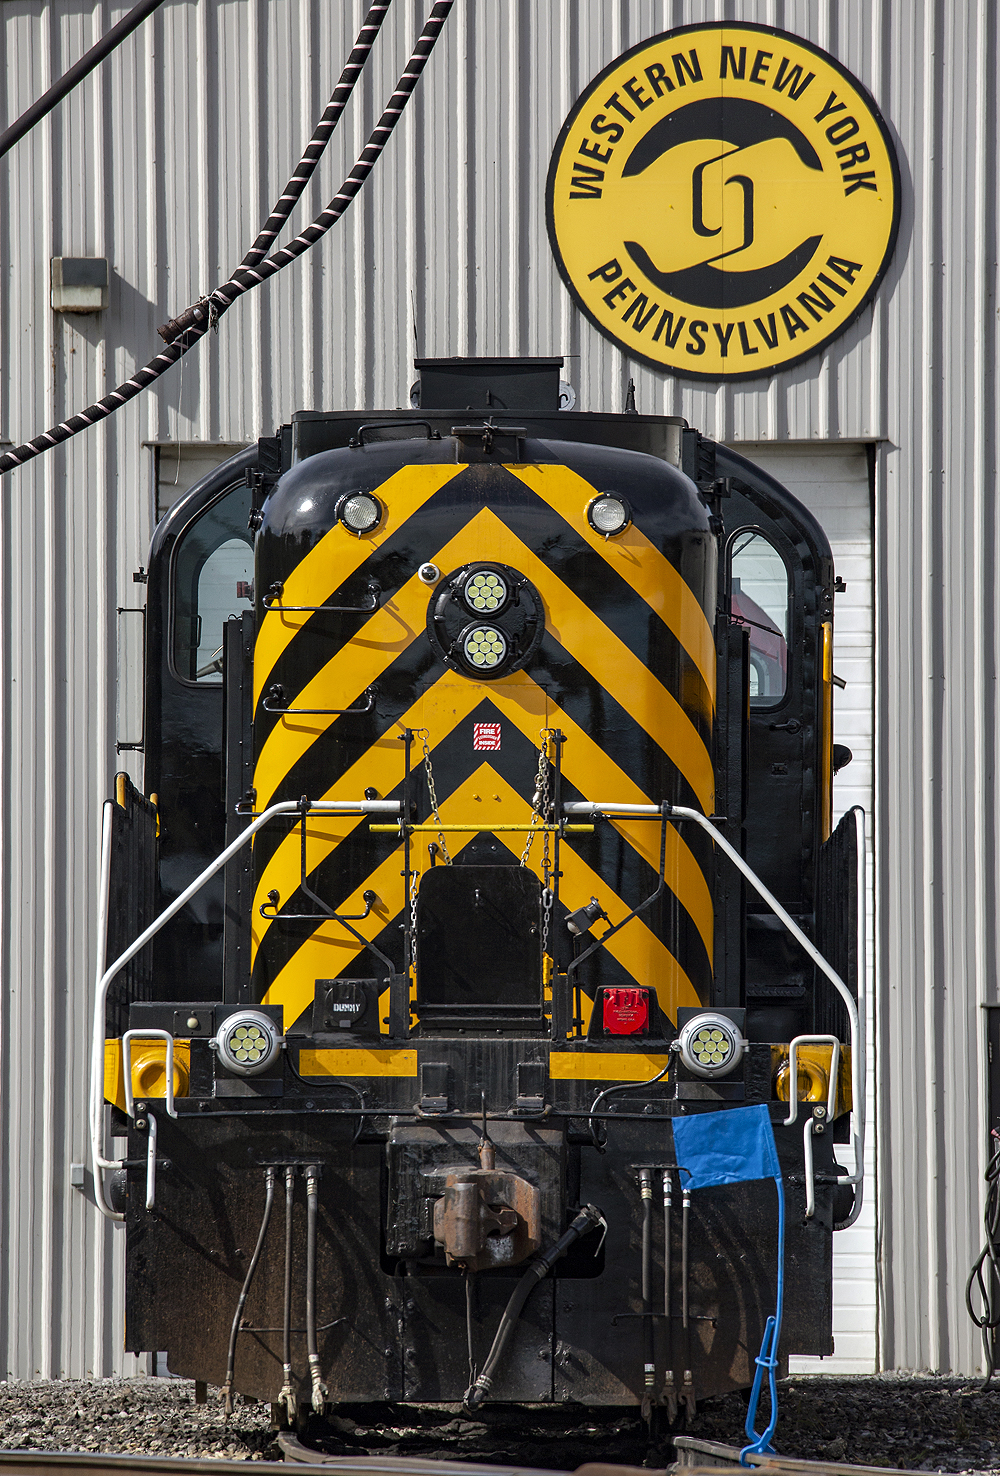 A black-and-yellow first-generation diesel locomotive in a locomotive shop.